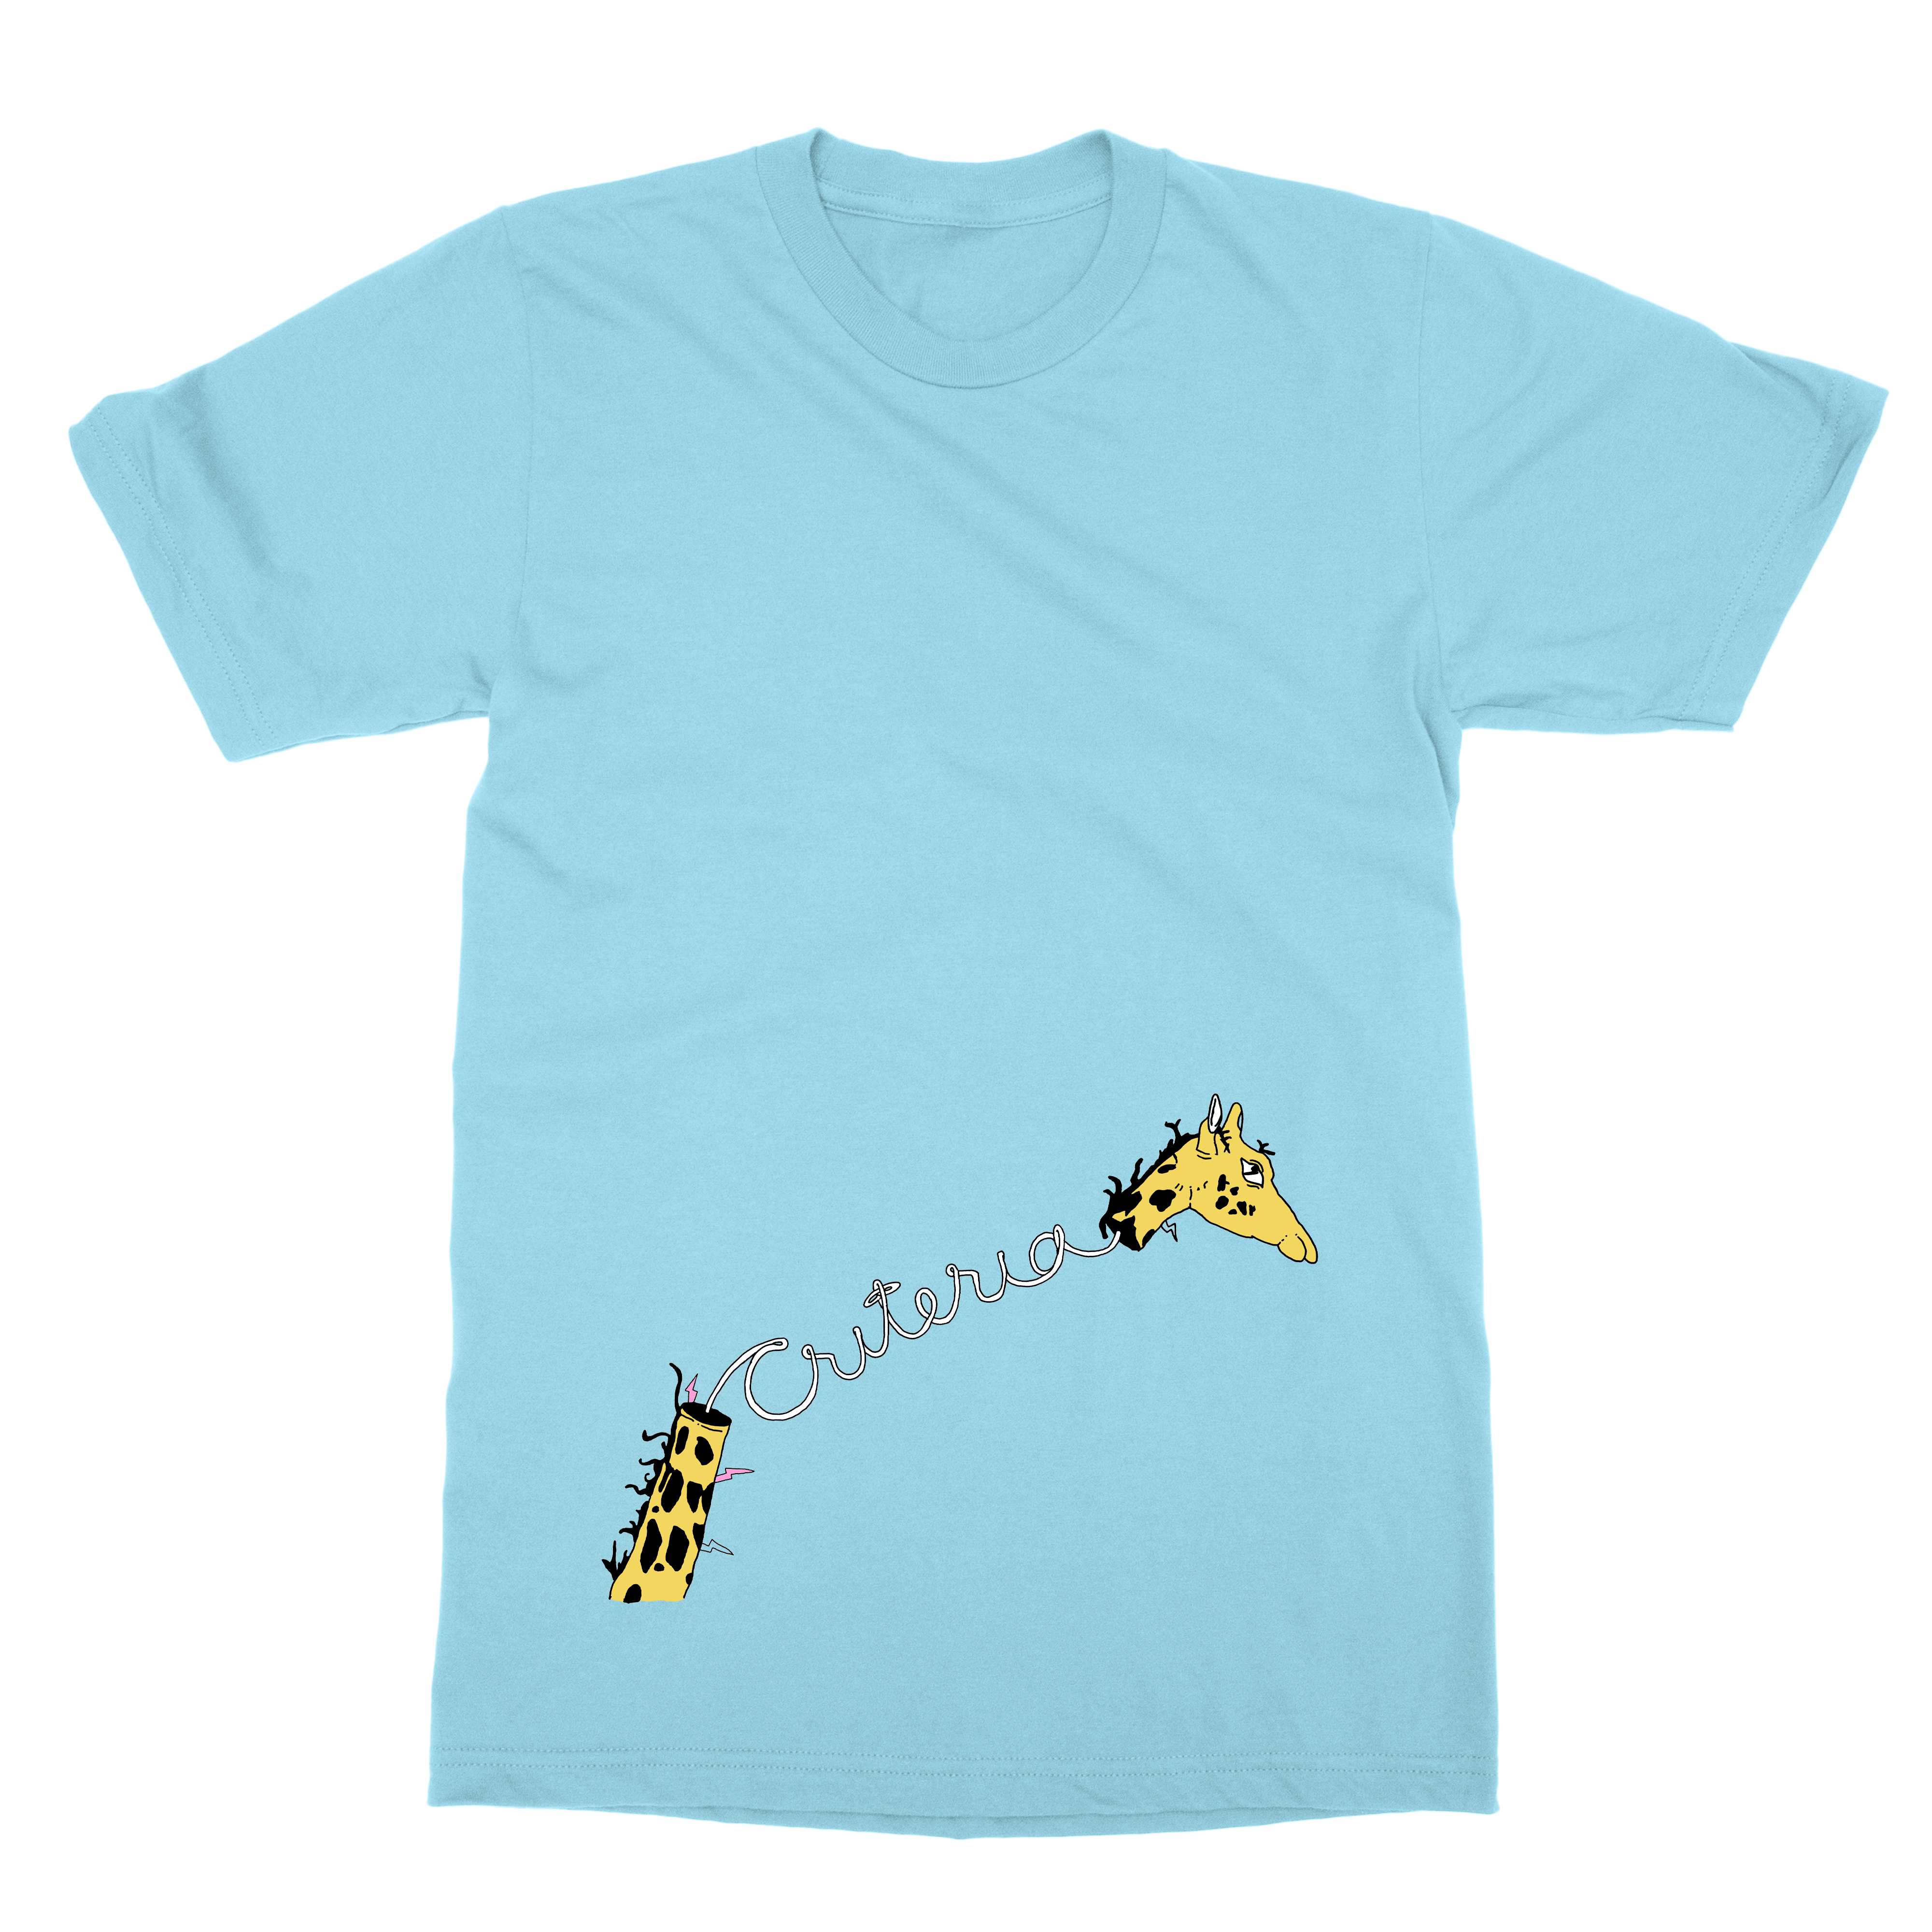 Criteria Giraffe T-Shirt is a baby blue tee with a giraffe neck being split in half and spelling criteria in the middle